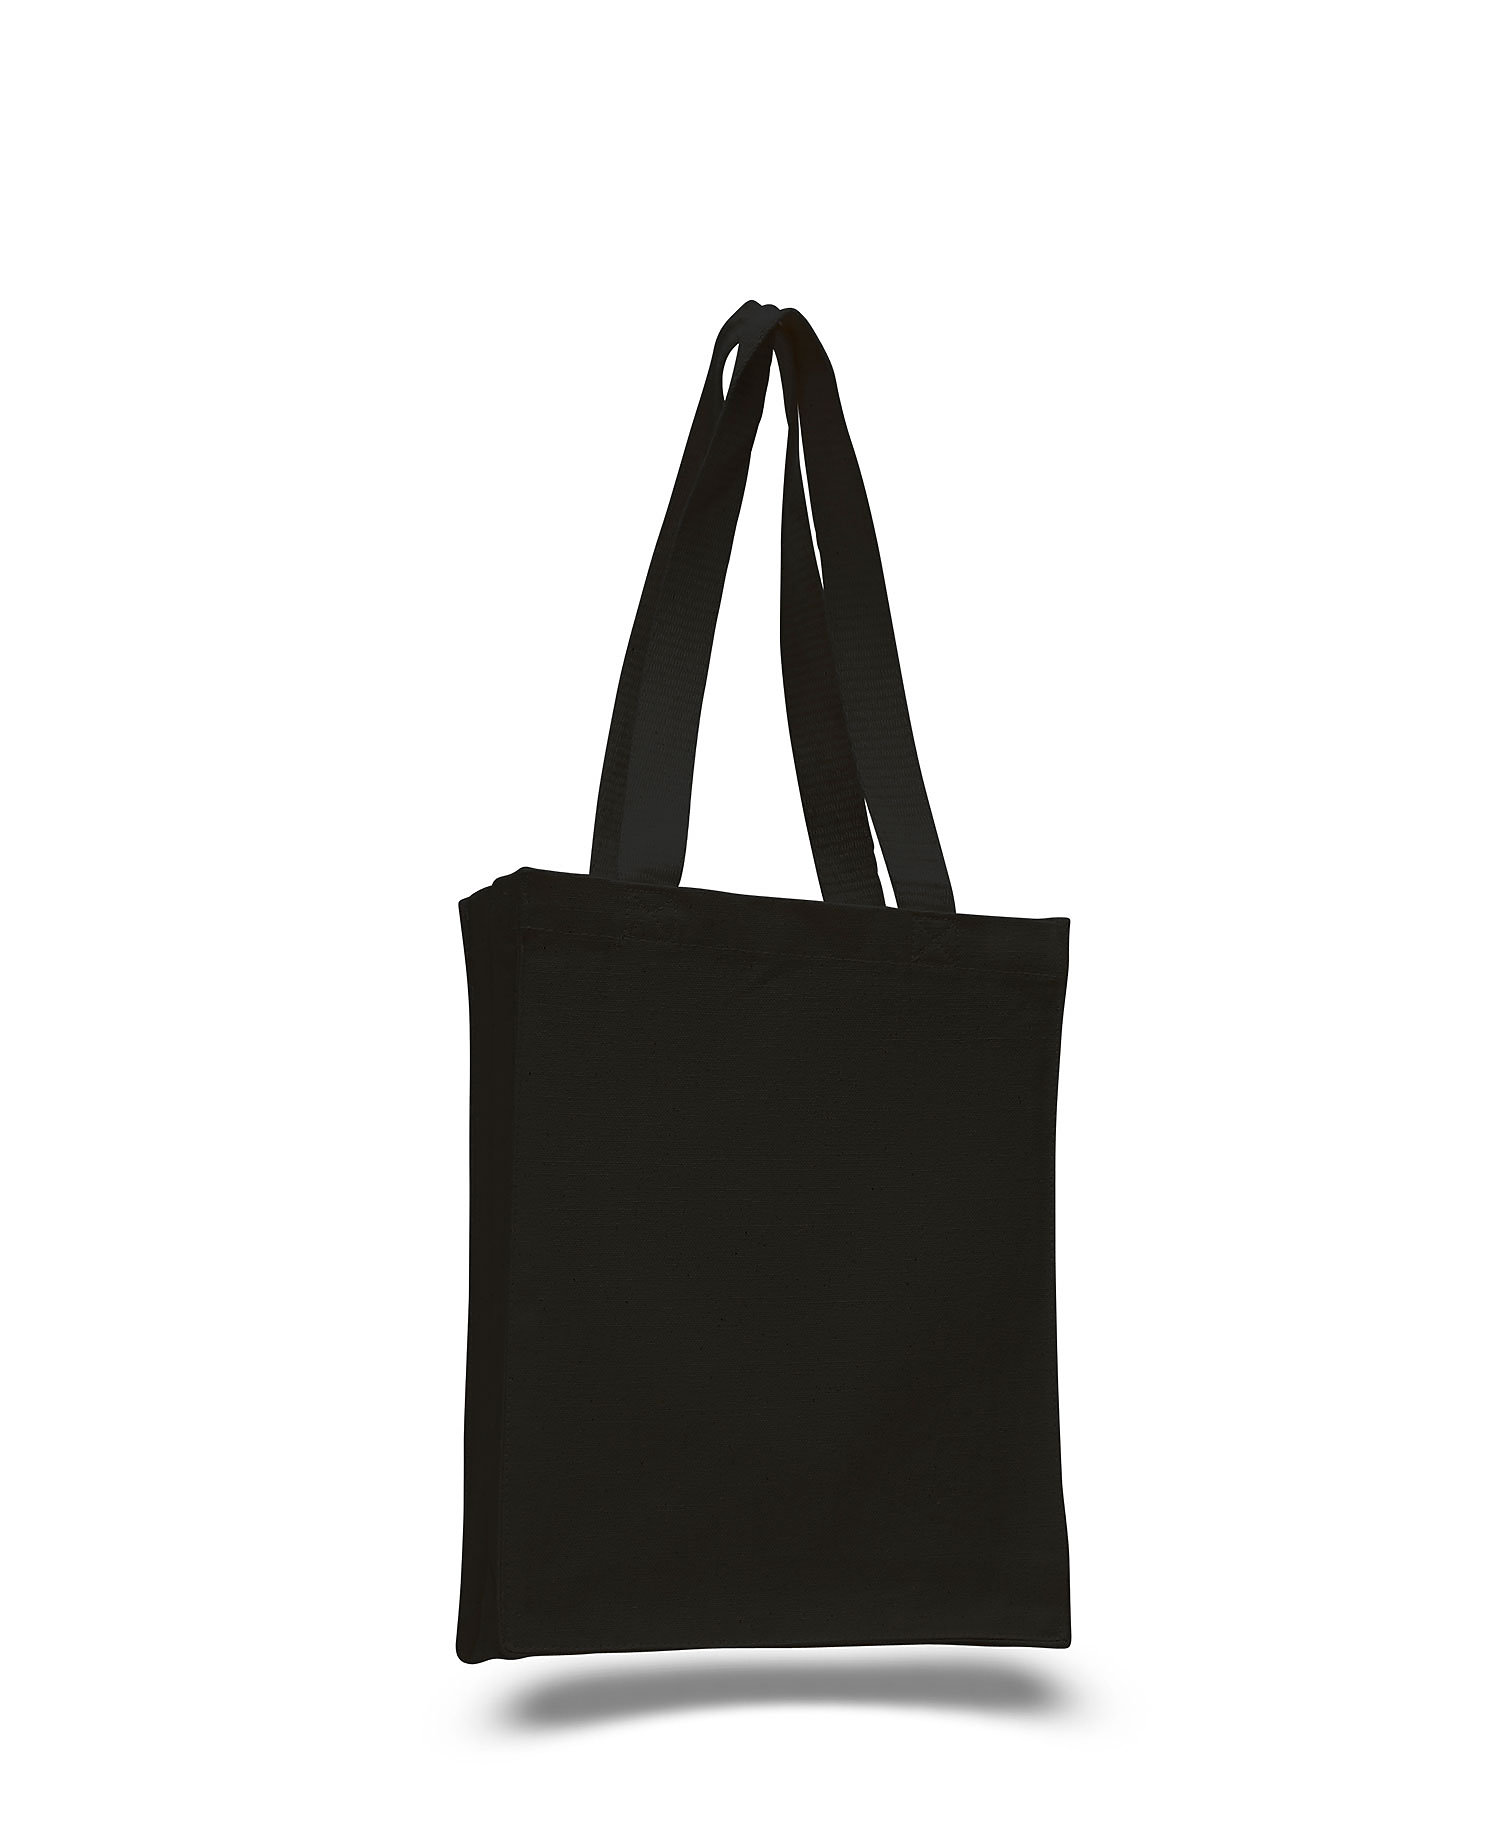 Q-Tees Q125200 - Canvas Book Bag with Gusset